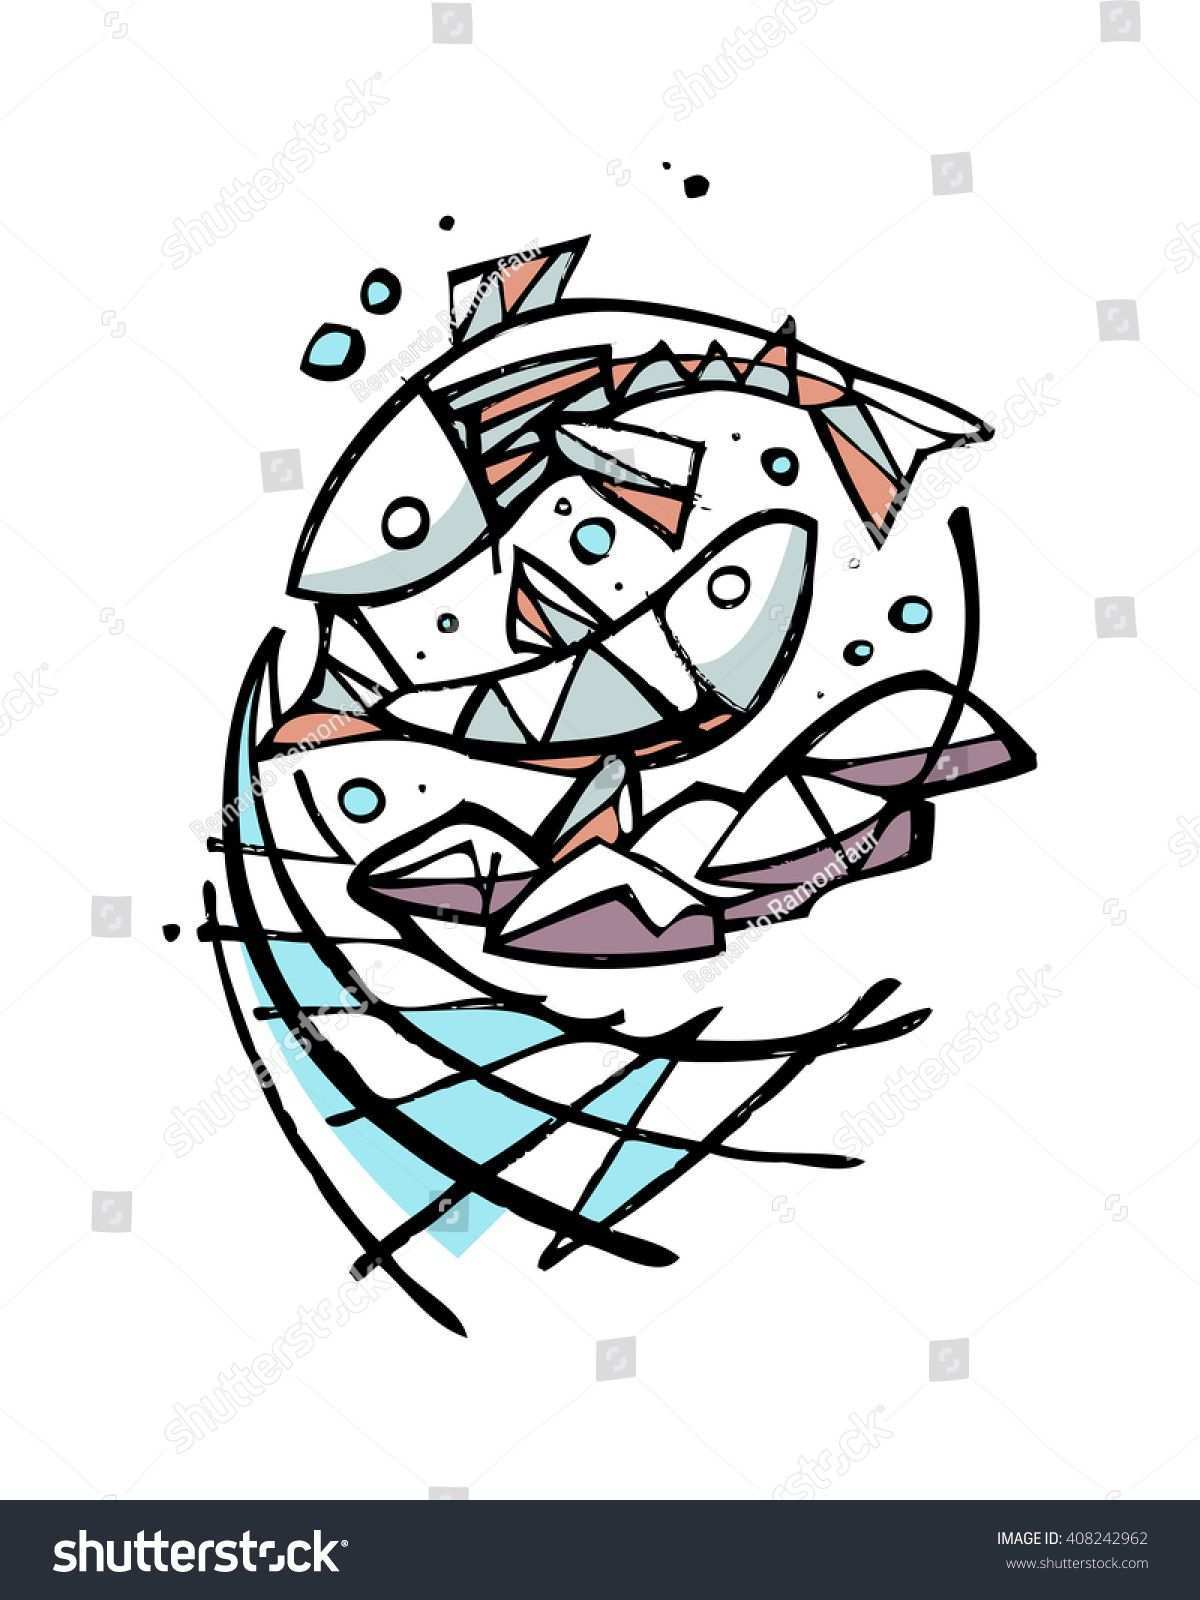 Hand Drawn Vector Illustration Or Drawing Of Five Breads And Two Fishes Representing The Biblical Miracle Of J Desenho Cristao Desenho Religioso Arte Catolica